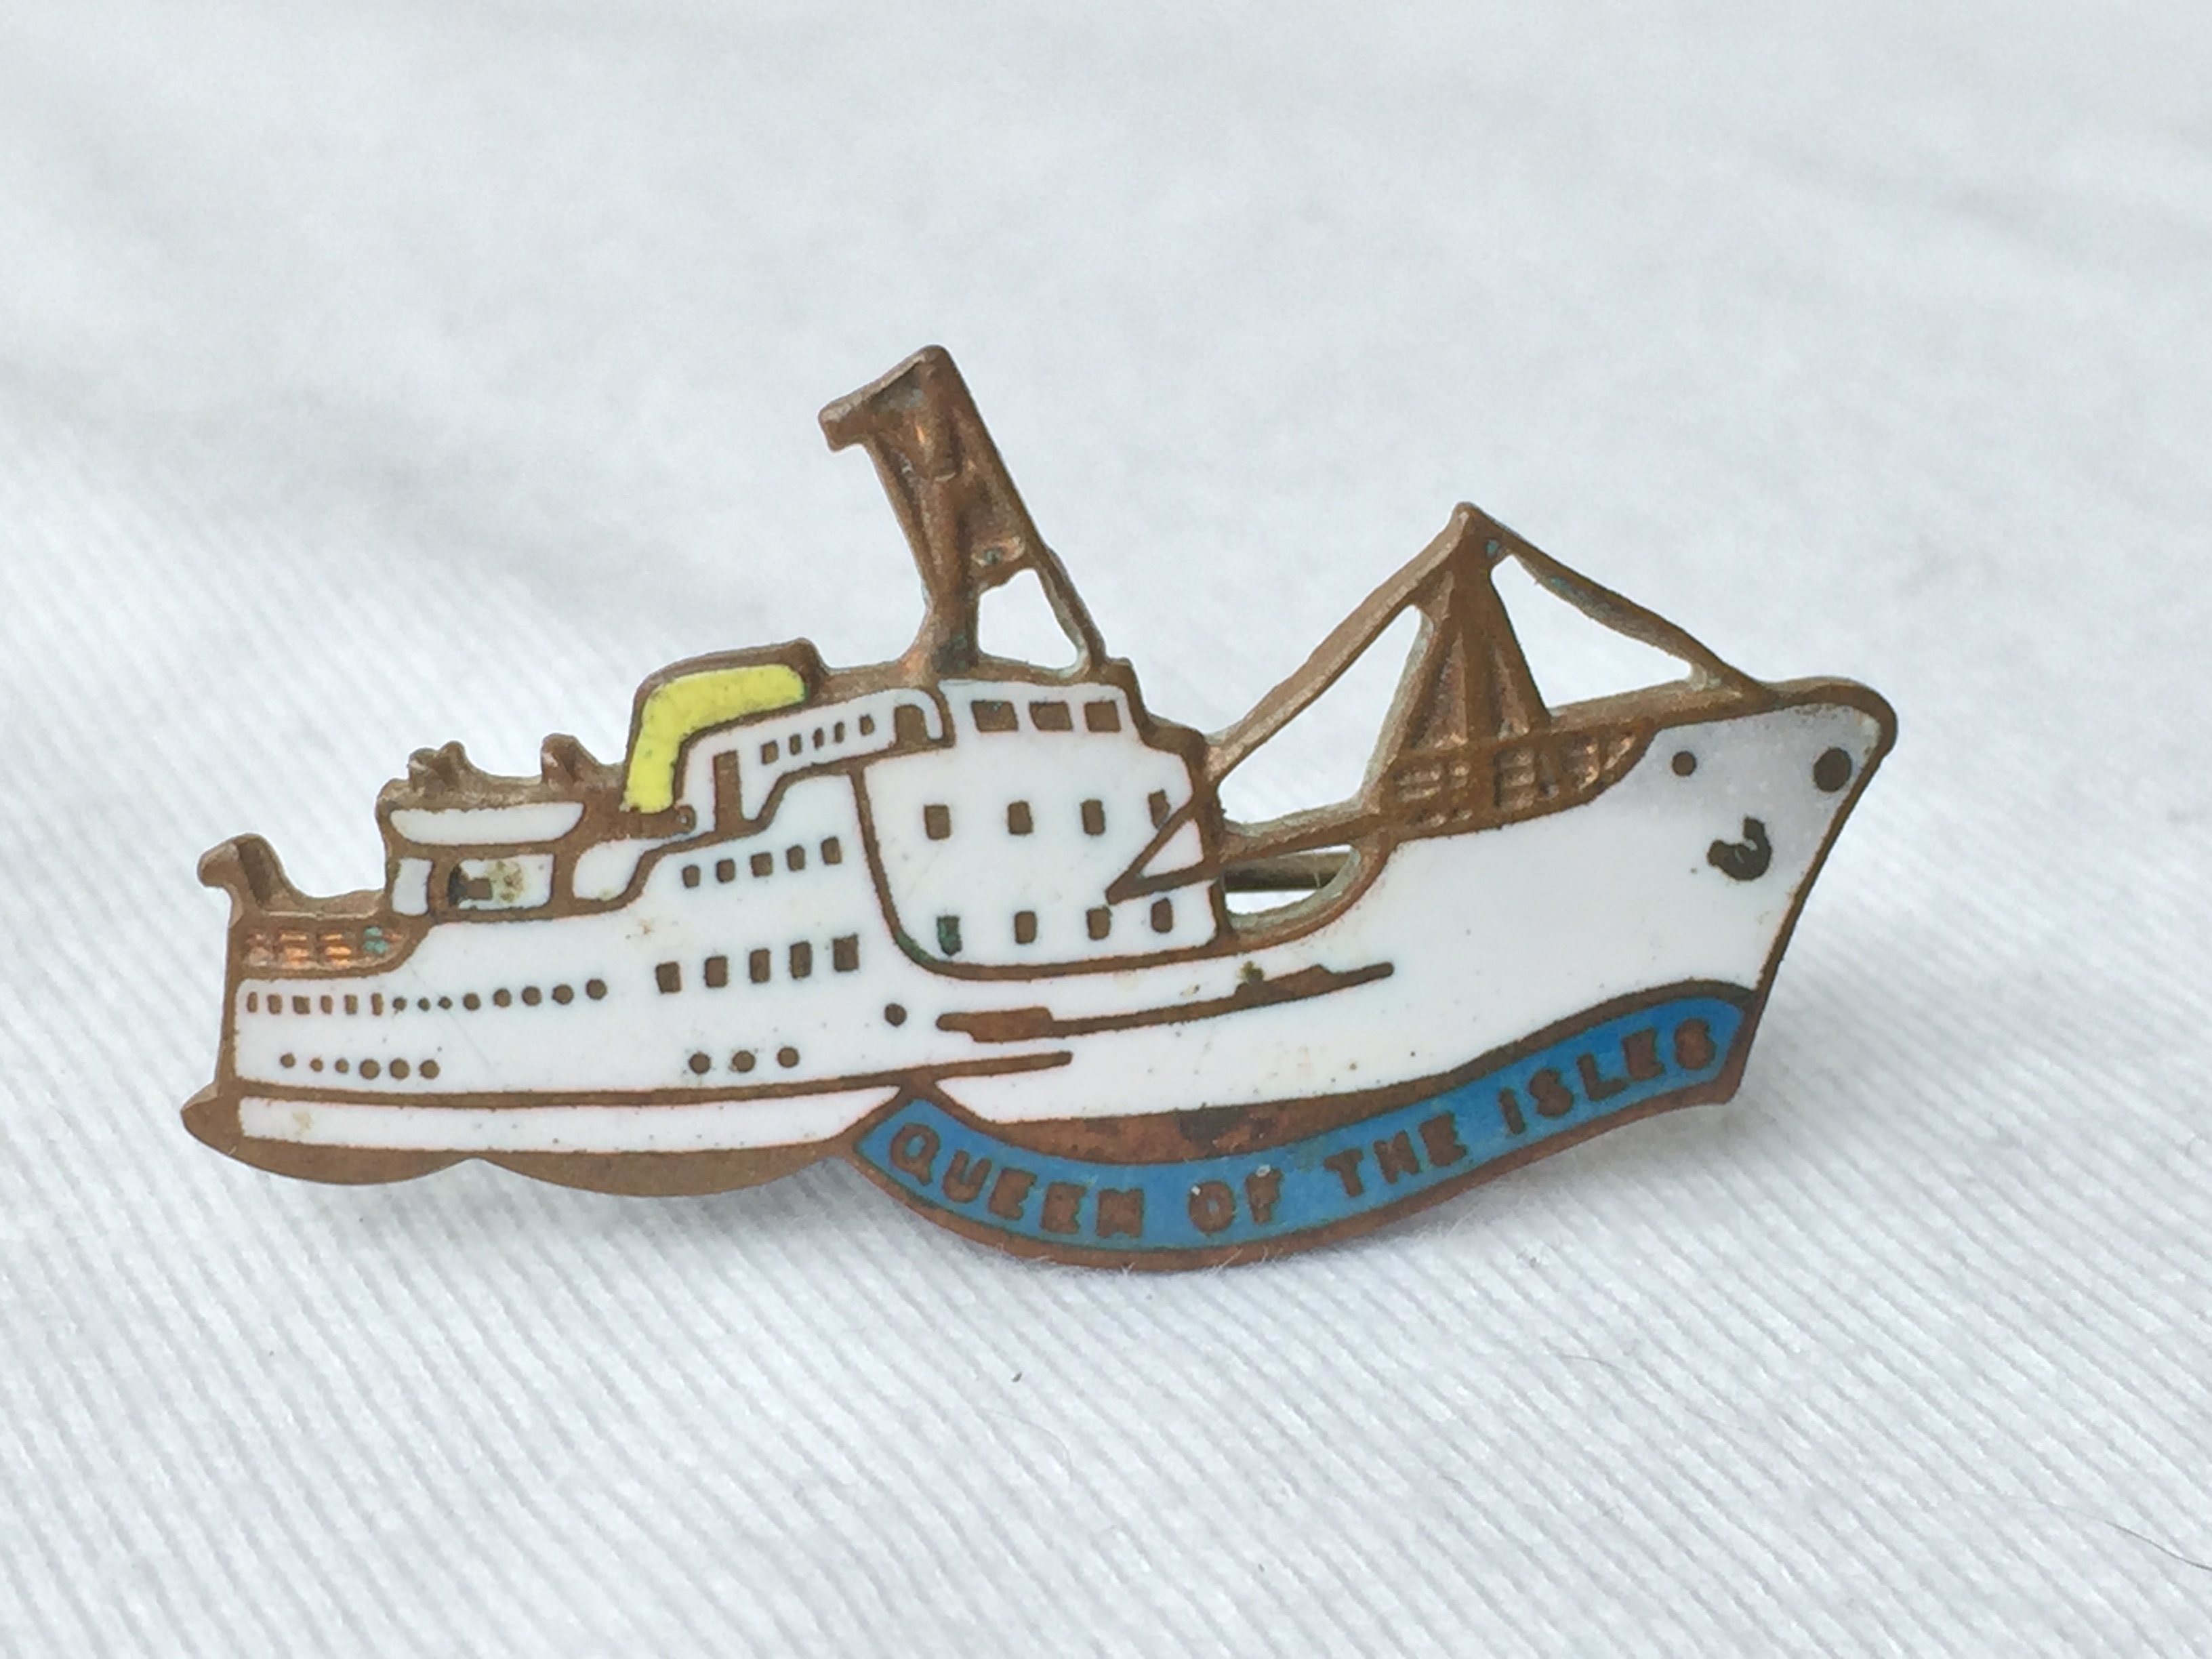 SHIP SHAPE LAPEL PIN FROM THE FERRY CROSSING SERVICE VESSEL THE QUEEN OF THE ISLES